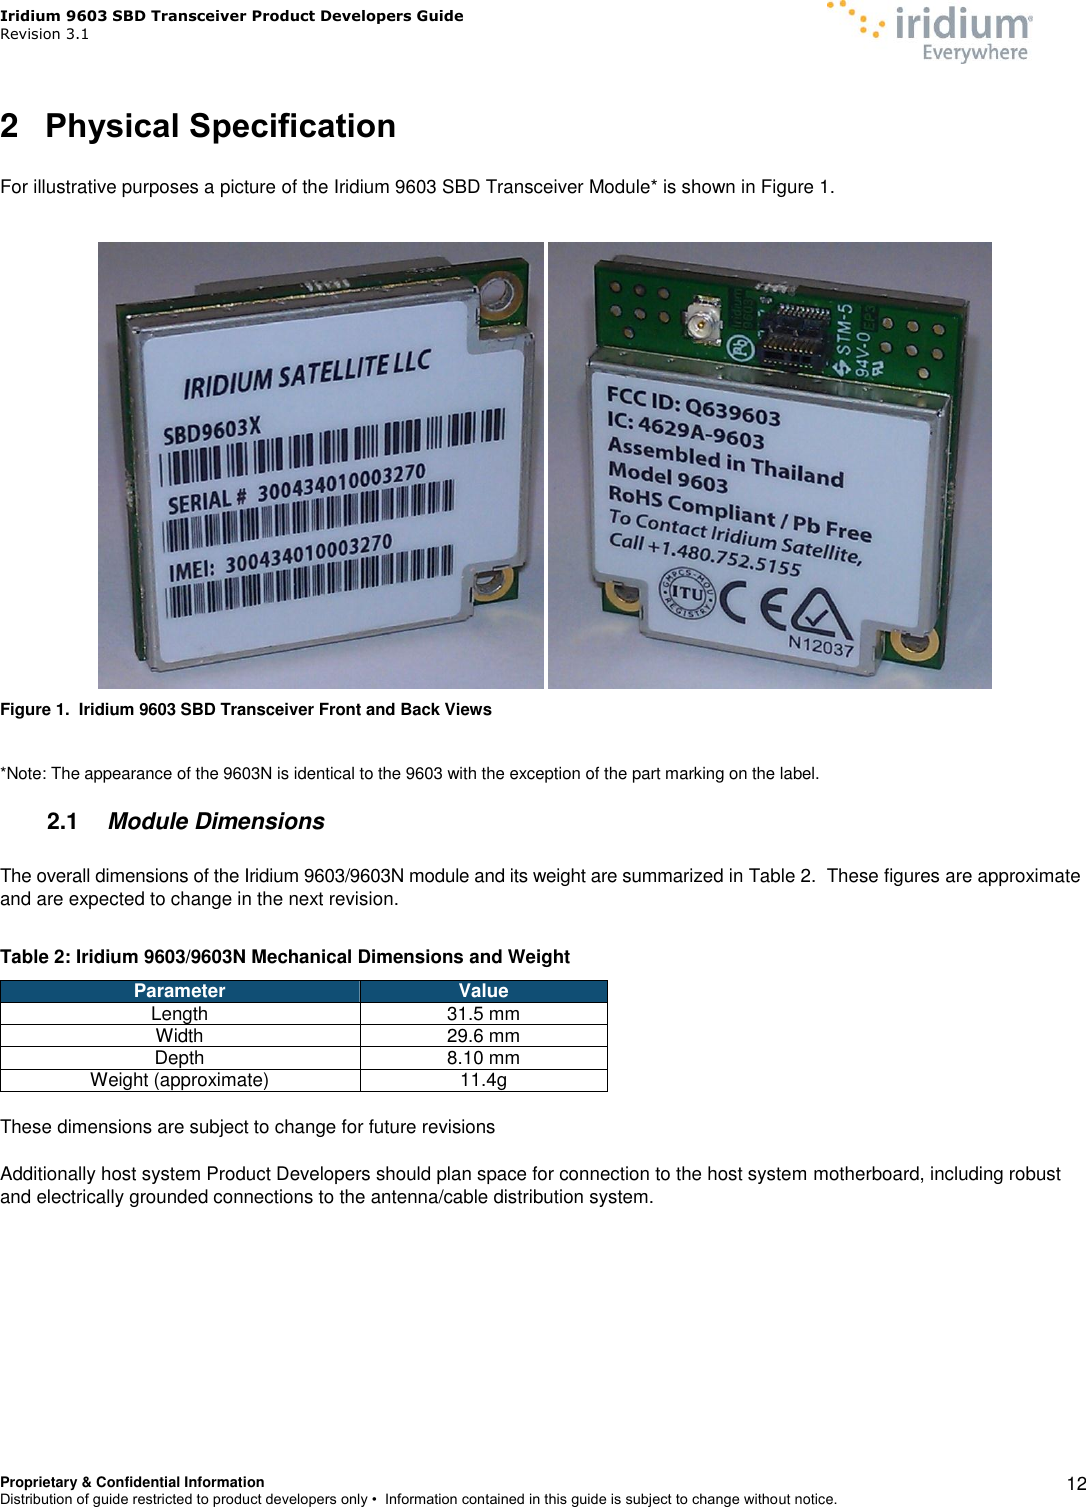 Iridium 9603 SBD Transceiver Product Developers Guide                                                Revision 3.1 Proprietary &amp; Confidential Information Distribution of guide restricted to product developers only •  Information contained in this guide is subject to change without notice.    12 2  Physical Specification  For illustrative purposes a picture of the Iridium 9603 SBD Transceiver Module* is shown in Figure 1.    Figure 1.  Iridium 9603 SBD Transceiver Front and Back Views  *Note: The appearance of the 9603N is identical to the 9603 with the exception of the part marking on the label. 2.1  Module Dimensions  The overall dimensions of the Iridium 9603/9603N module and its weight are summarized in Table 2.  These figures are approximate and are expected to change in the next revision.    Table 2: Iridium 9603/9603N Mechanical Dimensions and Weight Parameter Value Length 31.5 mm Width 29.6 mm  Depth 8.10 mm Weight (approximate) 11.4g  These dimensions are subject to change for future revisions   Additionally host system Product Developers should plan space for connection to the host system motherboard, including robust and electrically grounded connections to the antenna/cable distribution system.  